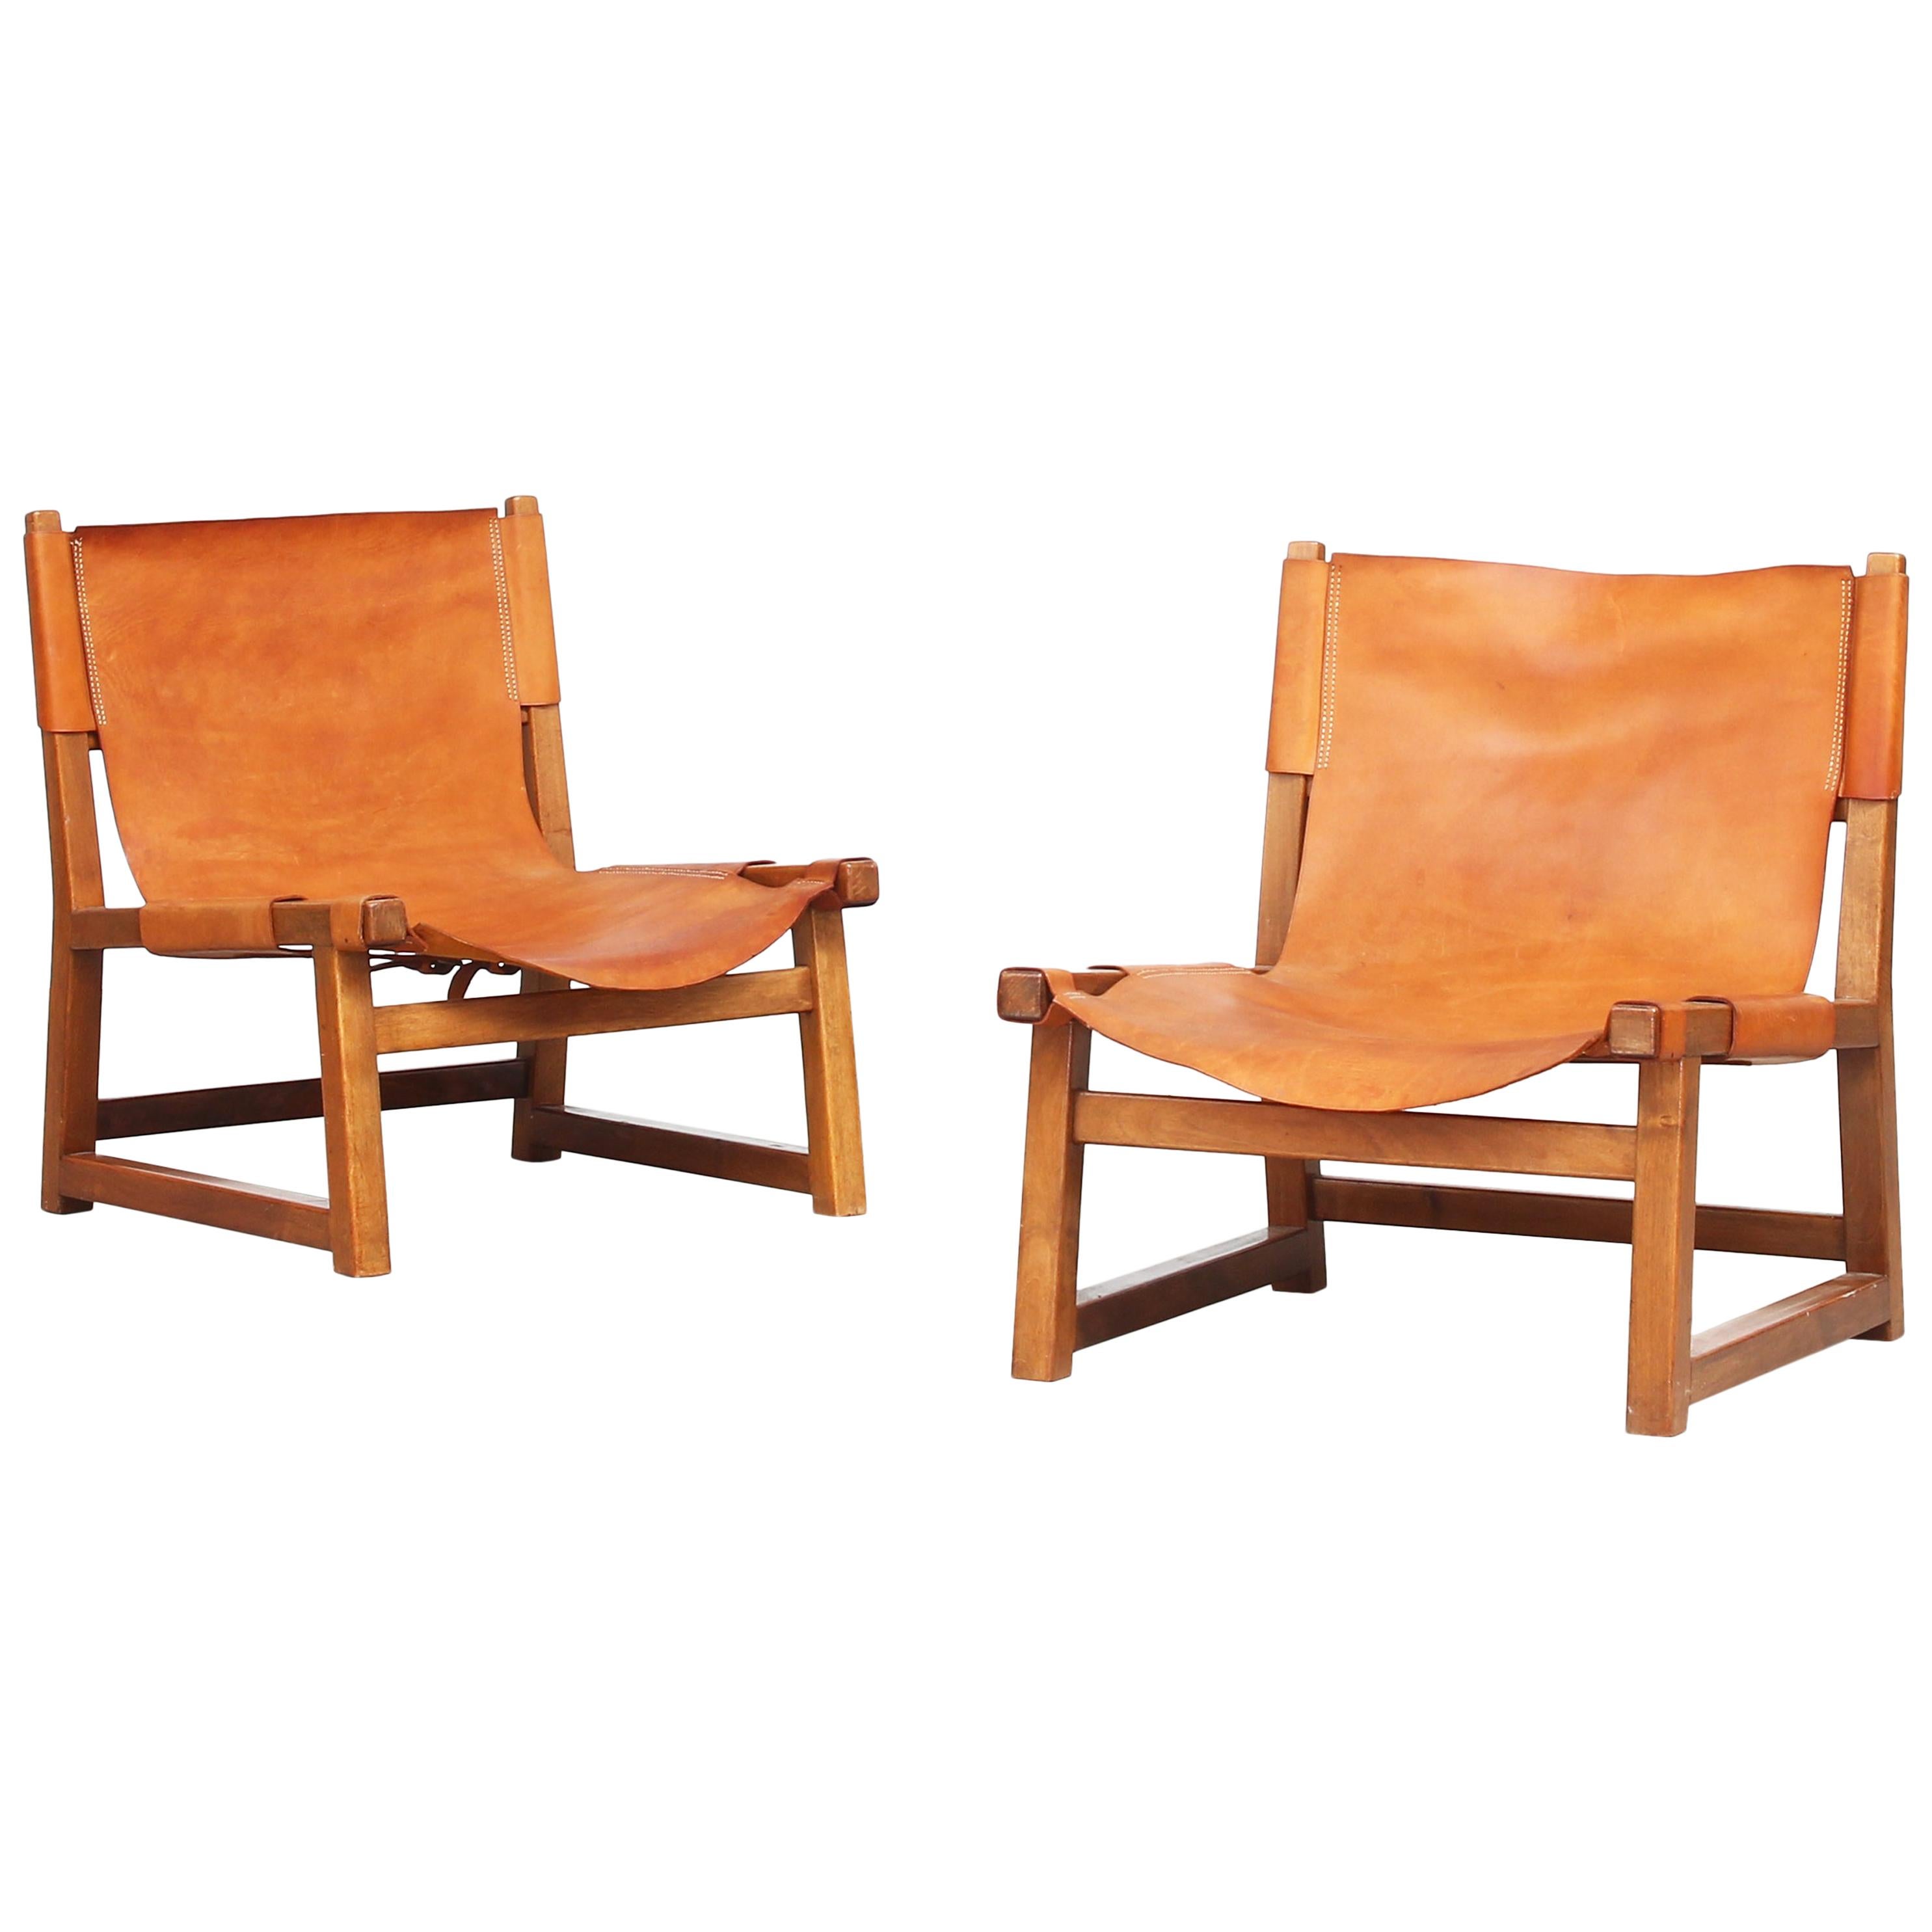 Pair of Paco Muñoz for Darro, 'Riaza' Chair Walnut and Leather, Spain, 1960s